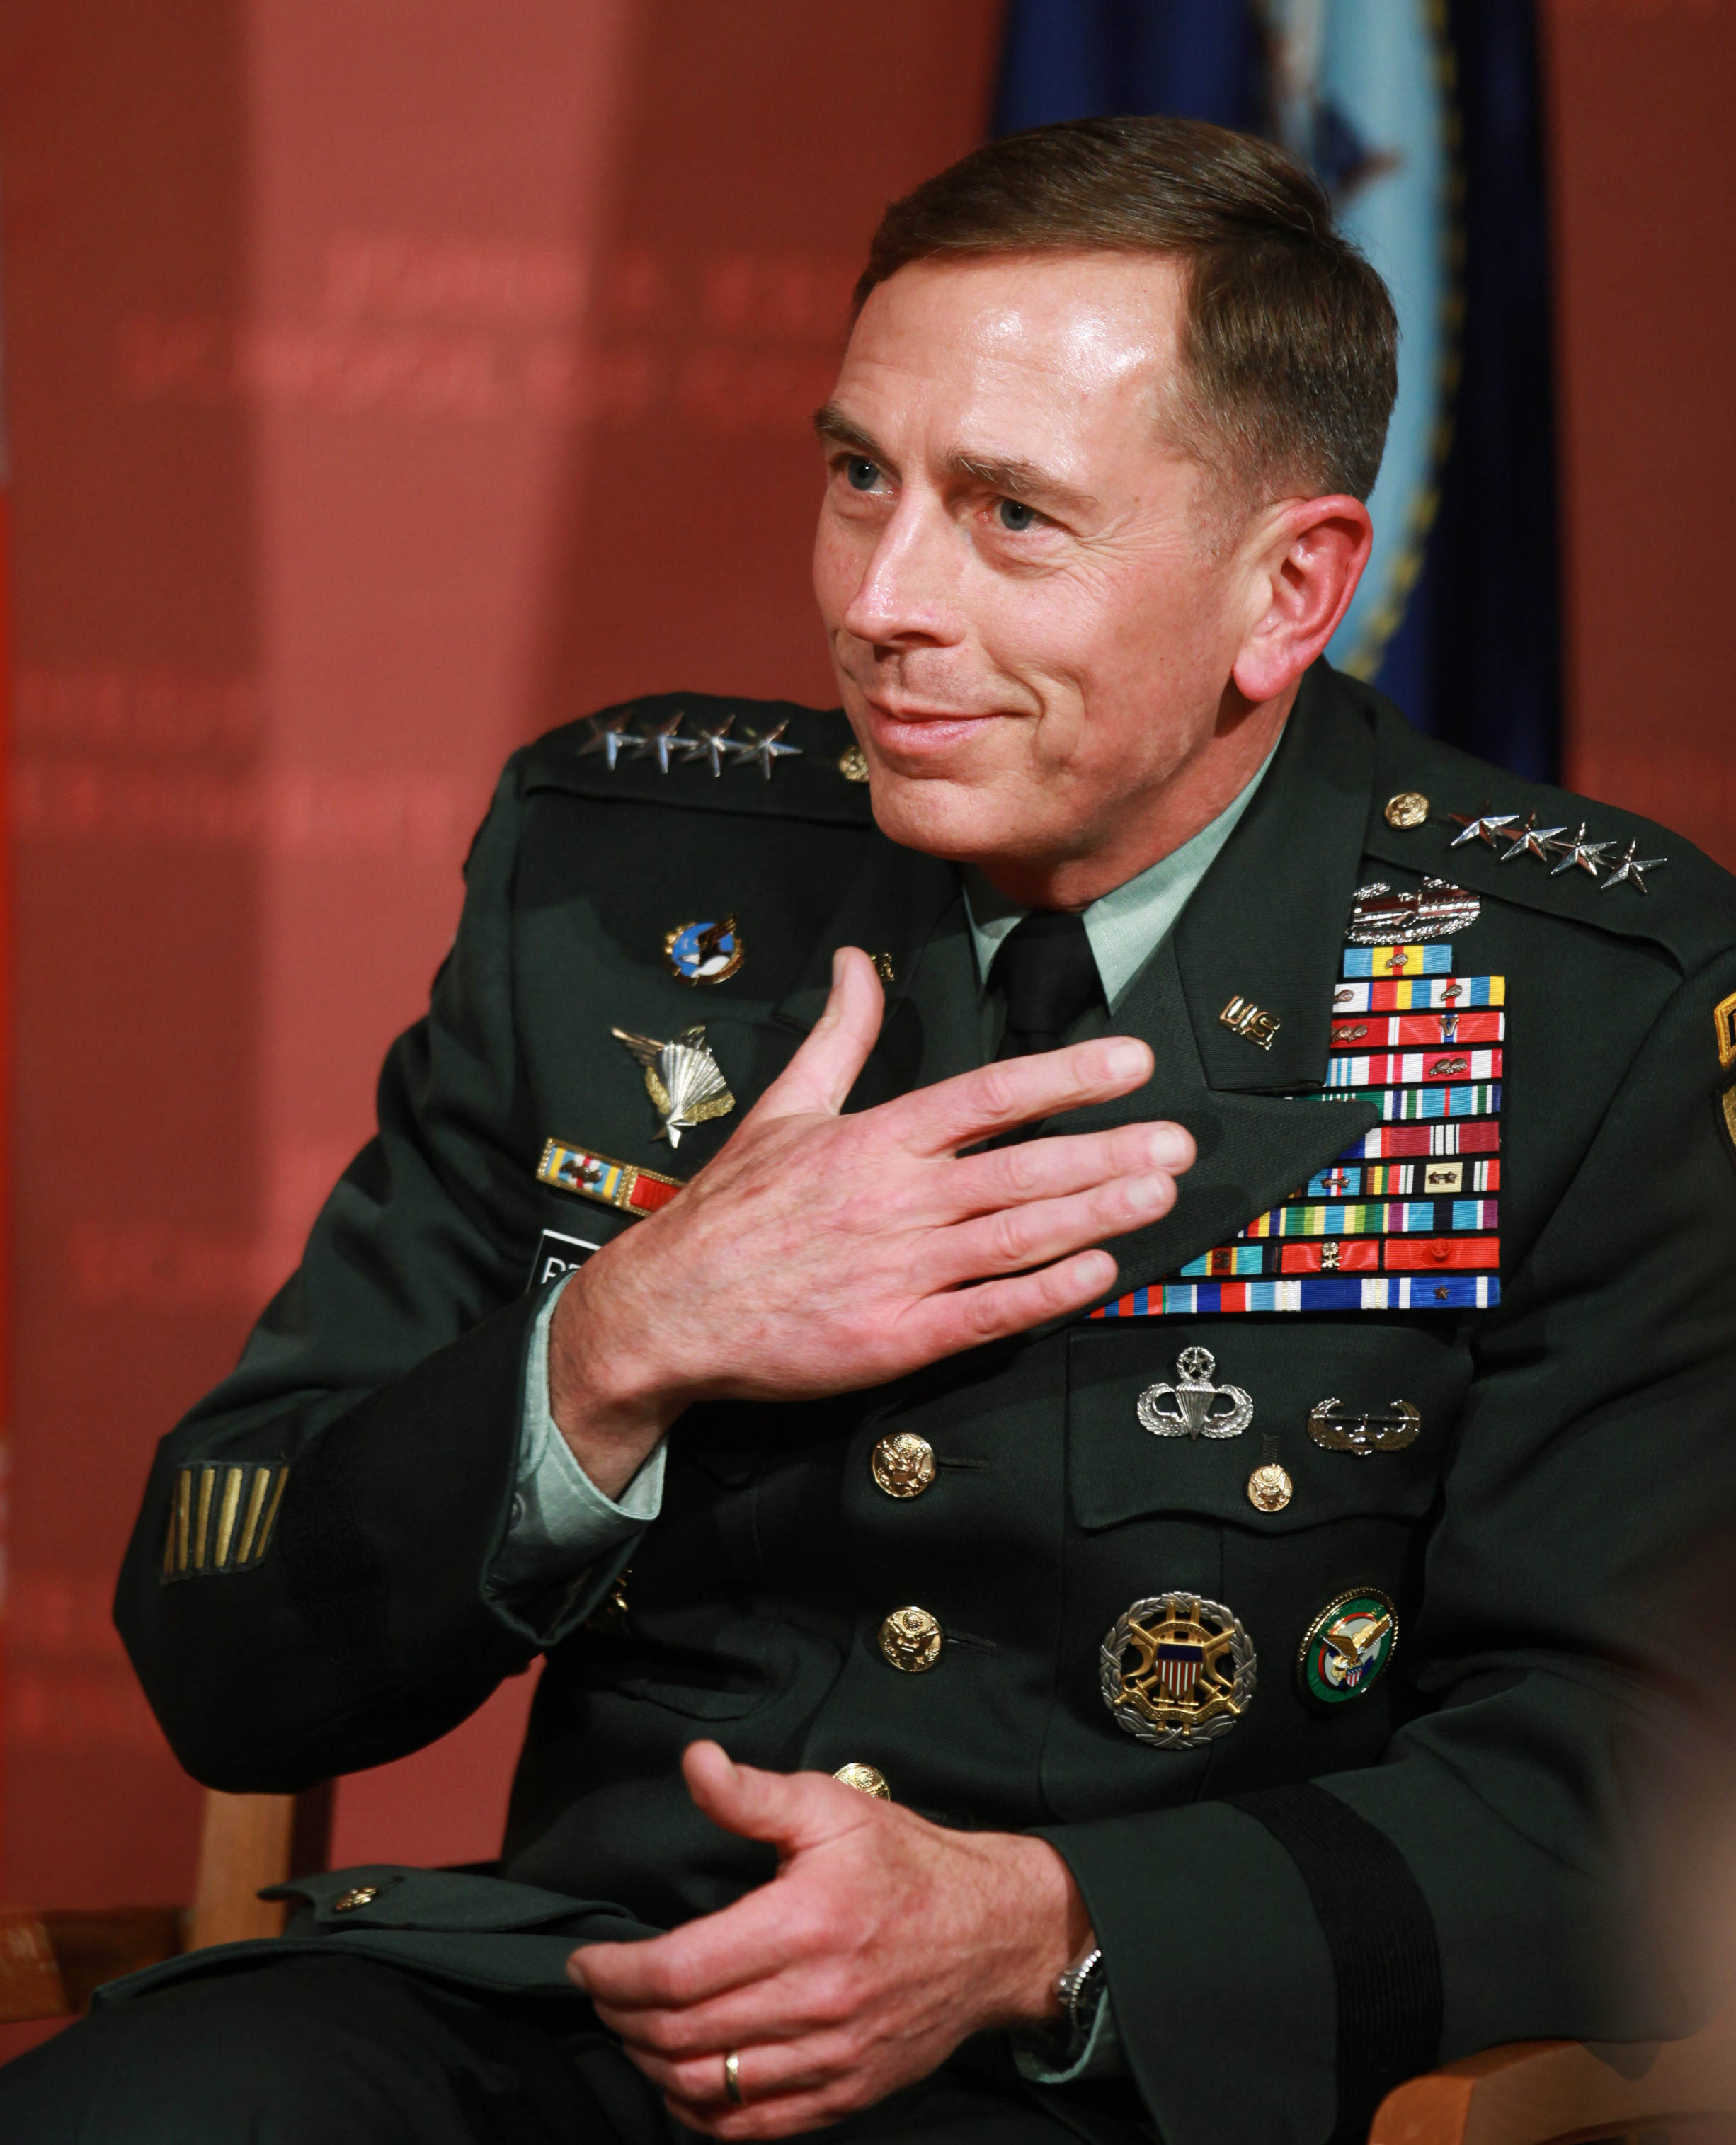 Army Gen. David Petraeus advocated for bringing ROTC back to Harvard in a talk on campus in 2009. (AP)